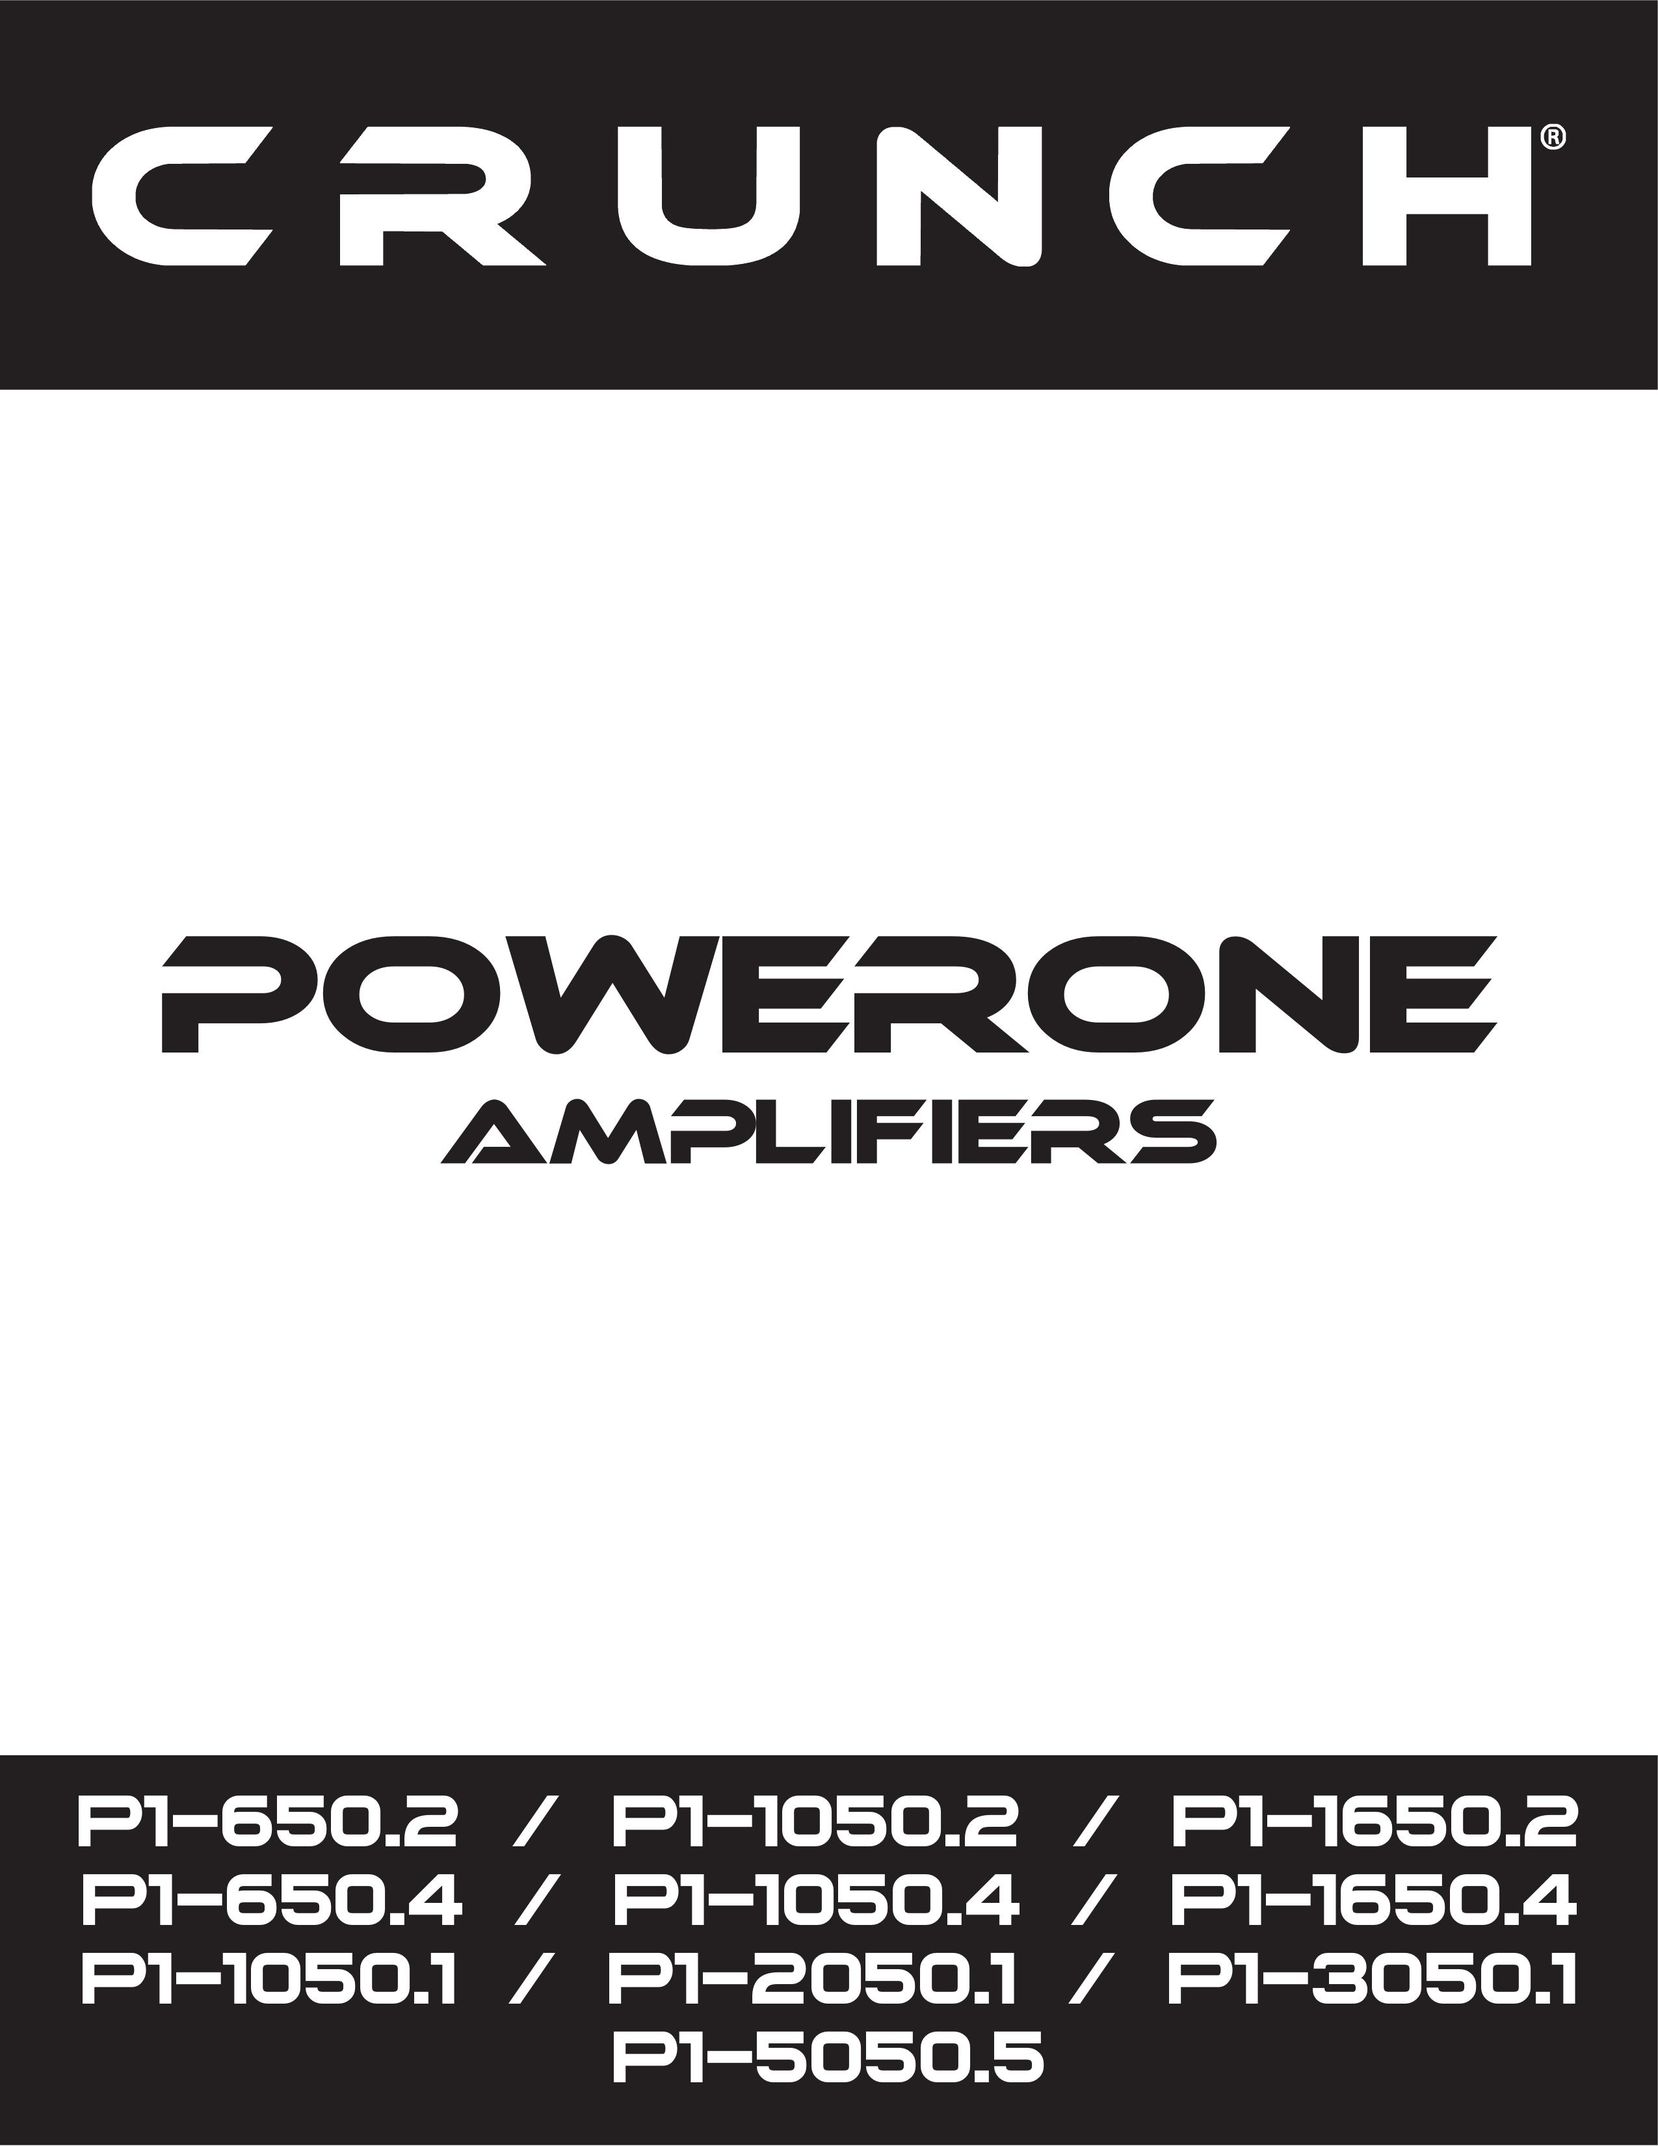 Crunch P1-1050.4 Stereo Amplifier User Manual